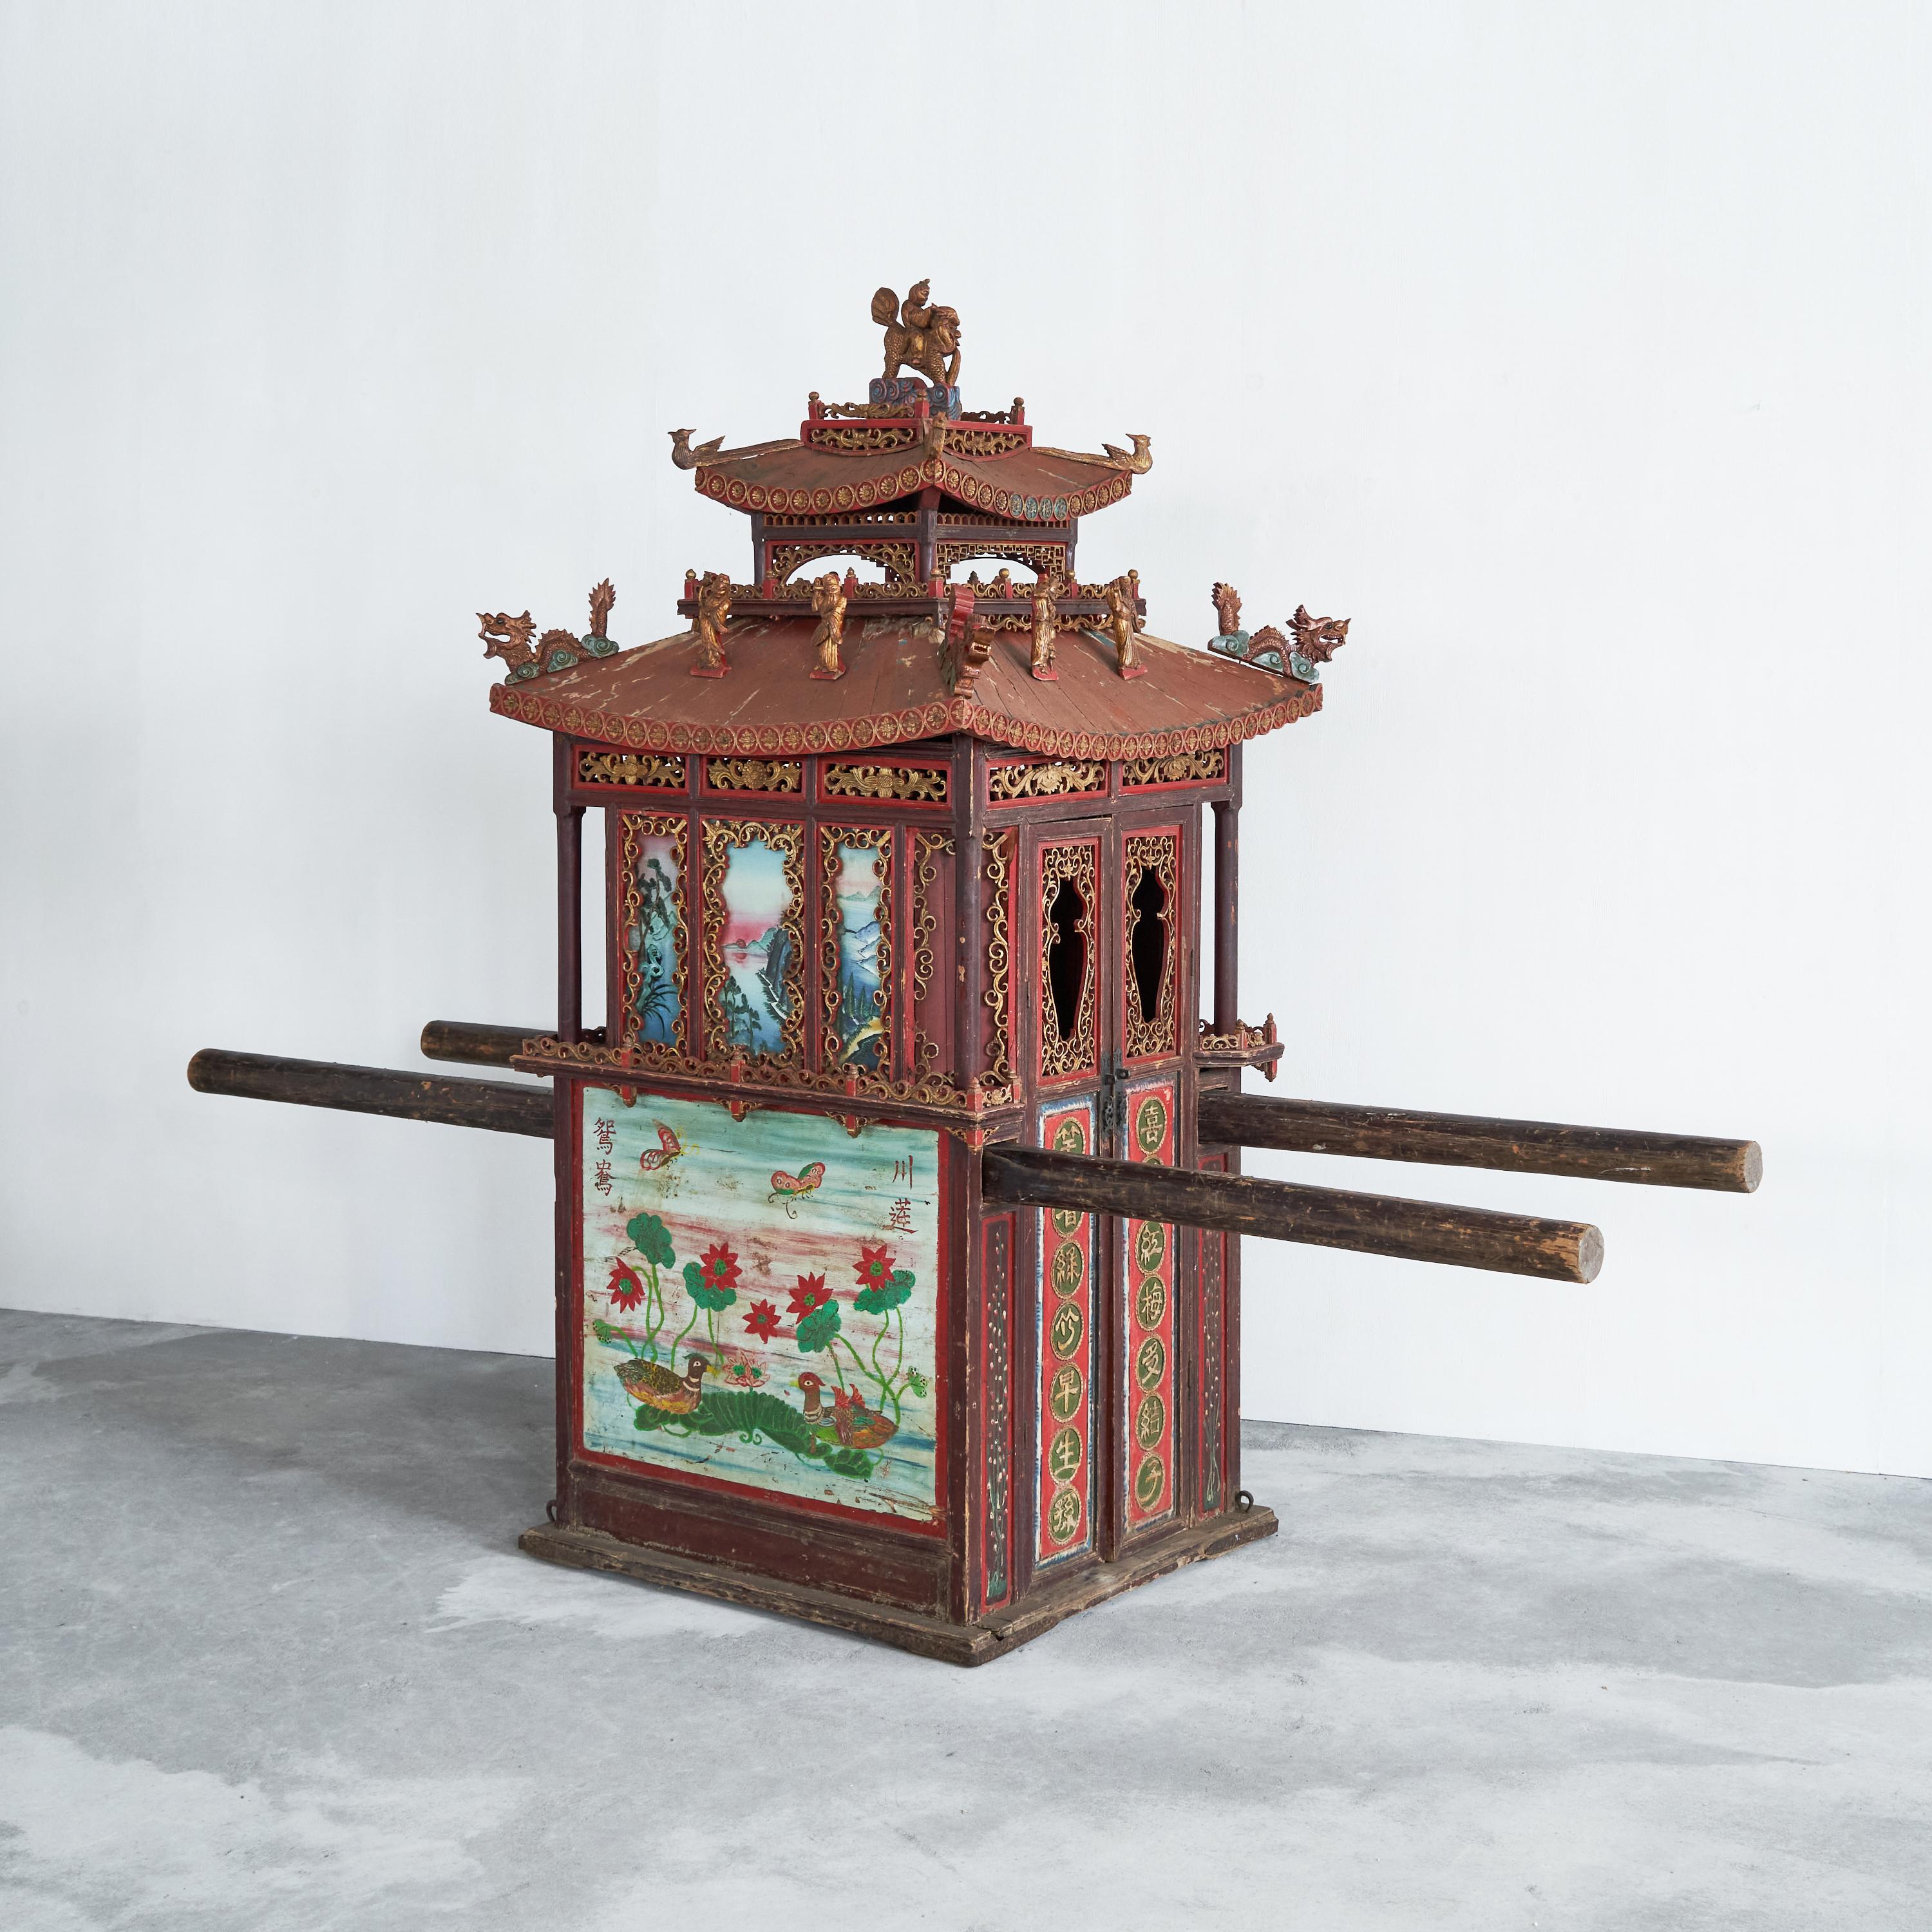 Antique Chinese sedan chair, China, late 19th century. 

This colorful and extraordinary decorated antique sedan or wedding chair from China is really something else. The origins or the Chinese sedan chair go back more than 4000 years. Used to